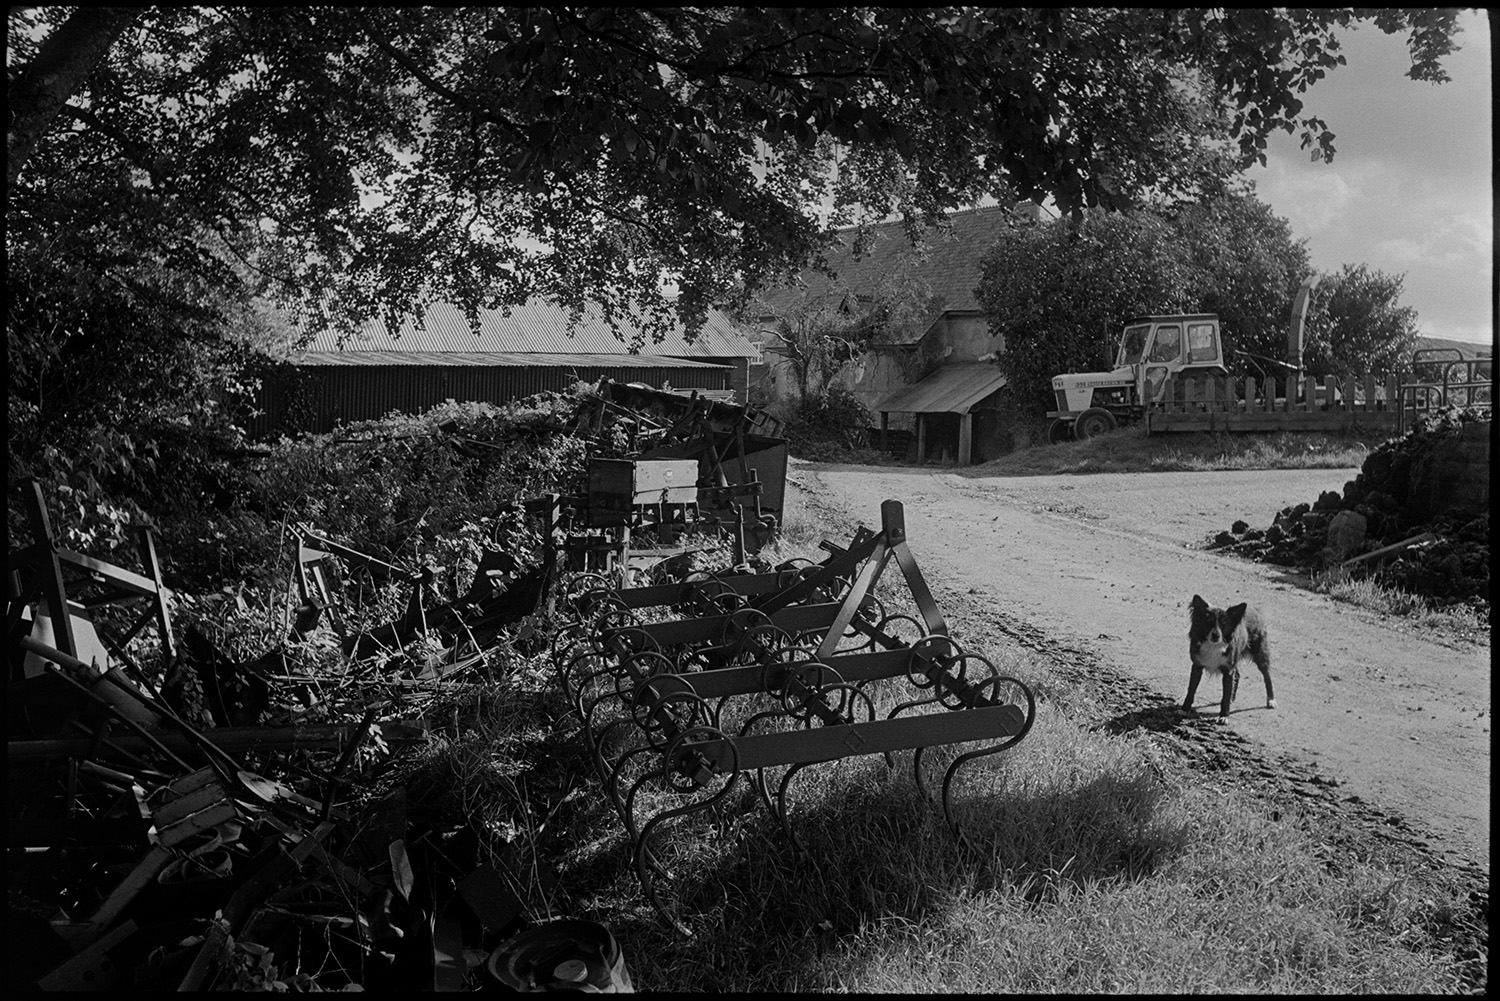 Dog barking in farm lane with parked harrow, old bulldozer. 
[A dog stood next to an old harrow on the verge of a lane at Spittle Farm, Chulmleigh. A corrugated iron barn, tractor and a farm buildings can be seen in the background.]